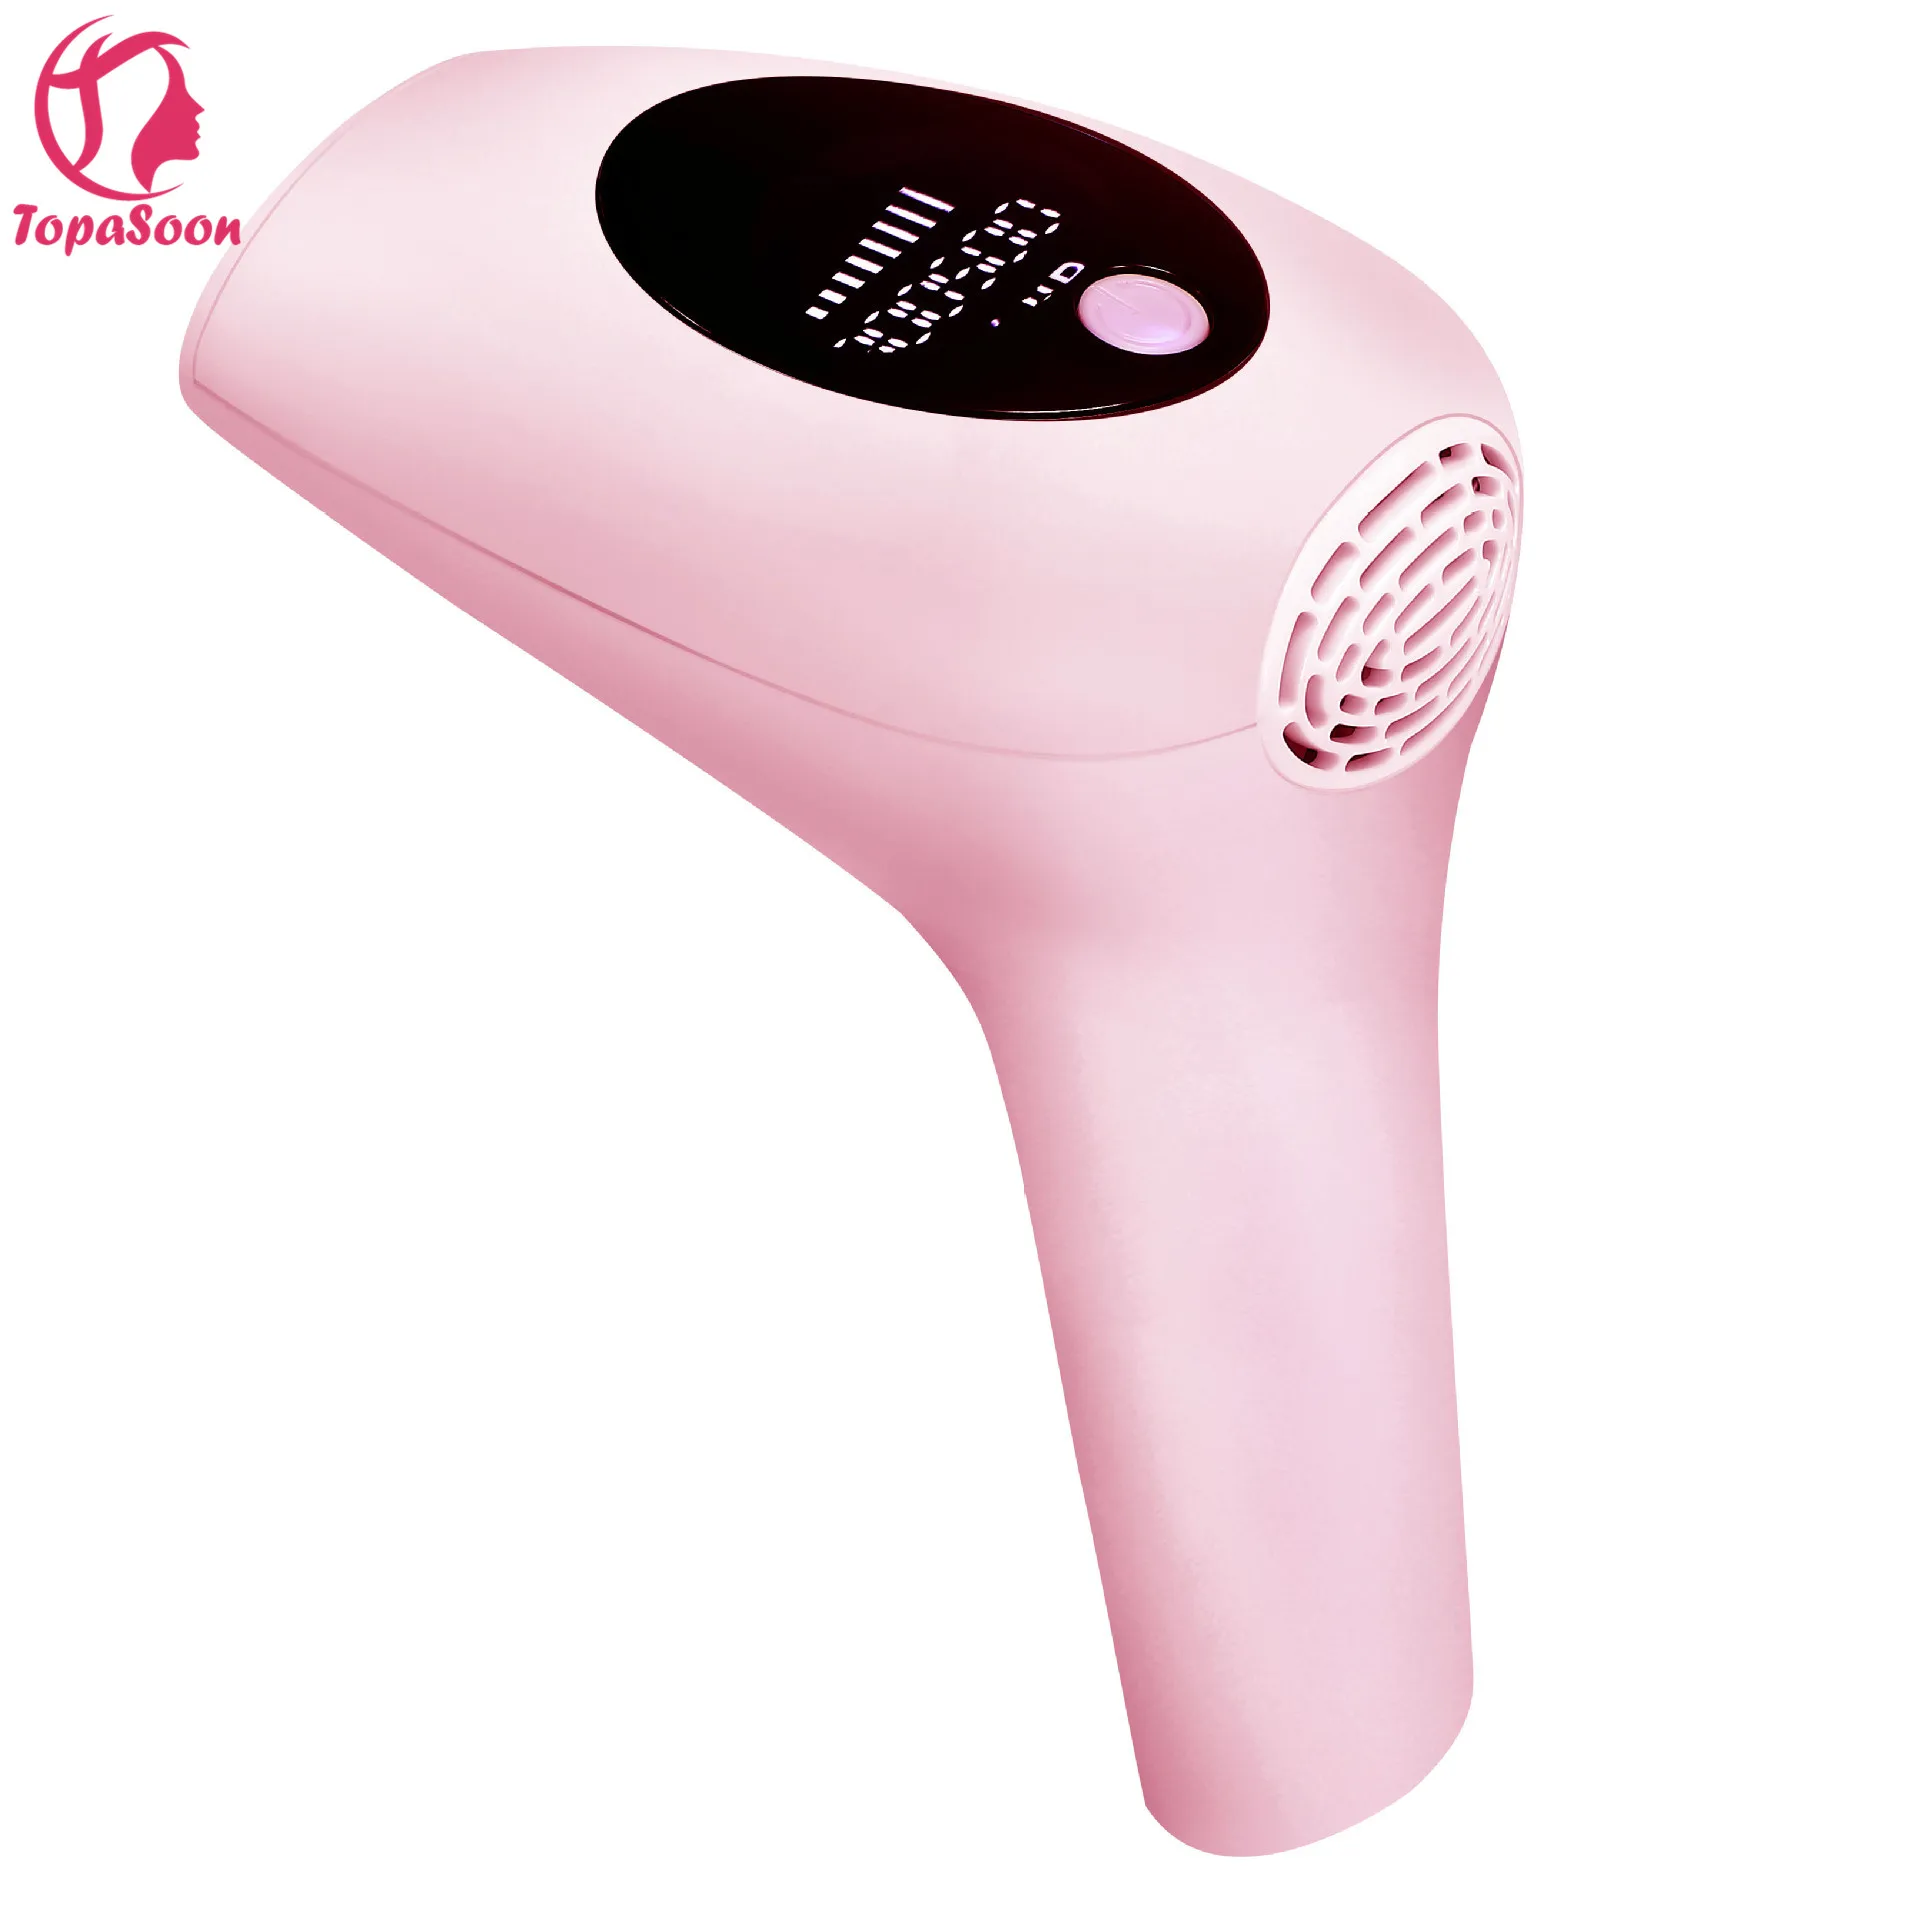 

Professional Las Beauty System Permanent Skin Rejuvenation Laser Treatment Hair Removal At Home Ipl Epilator Facial Hair Remover